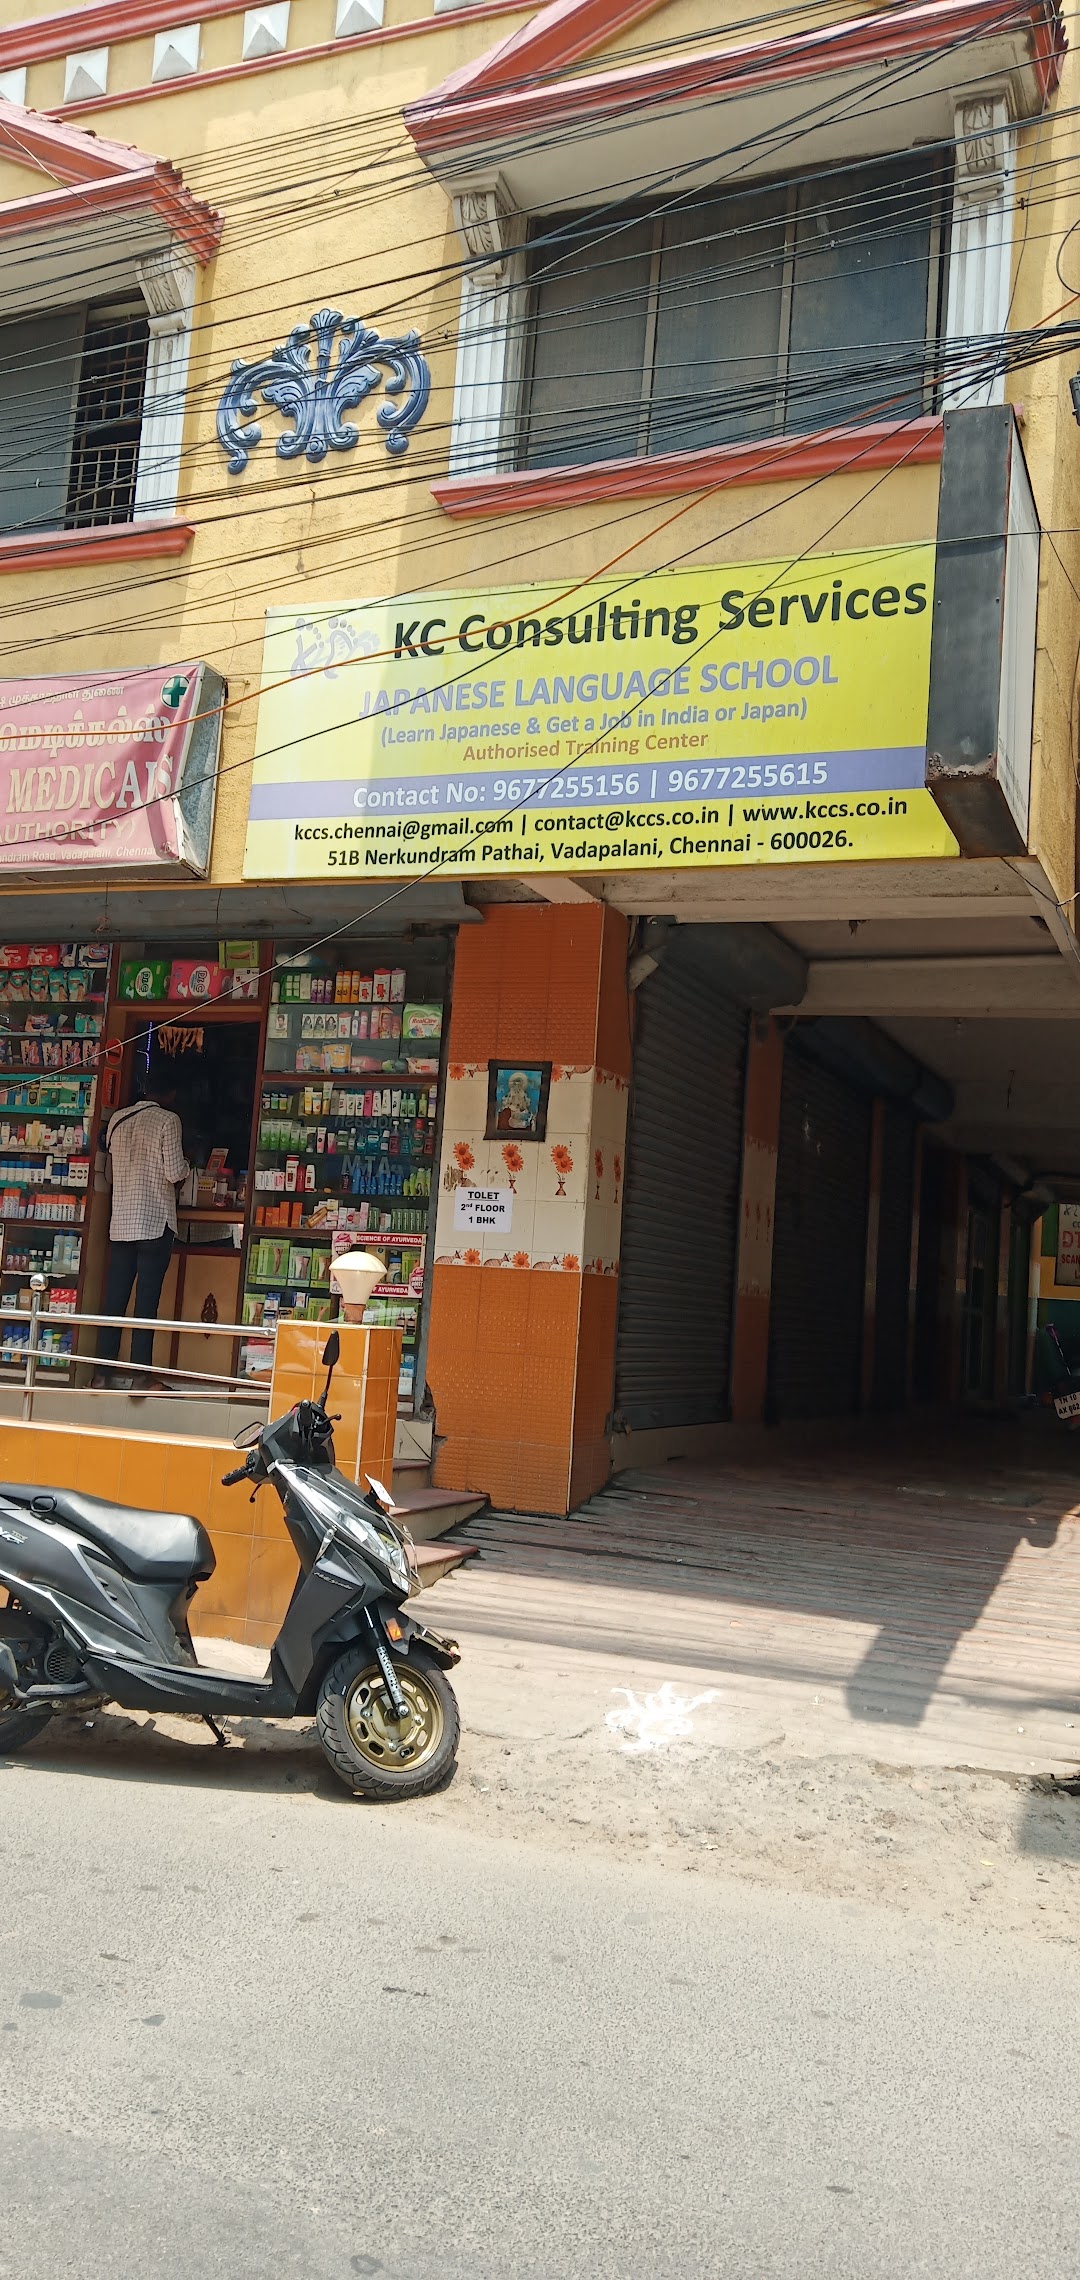 KC Consulting